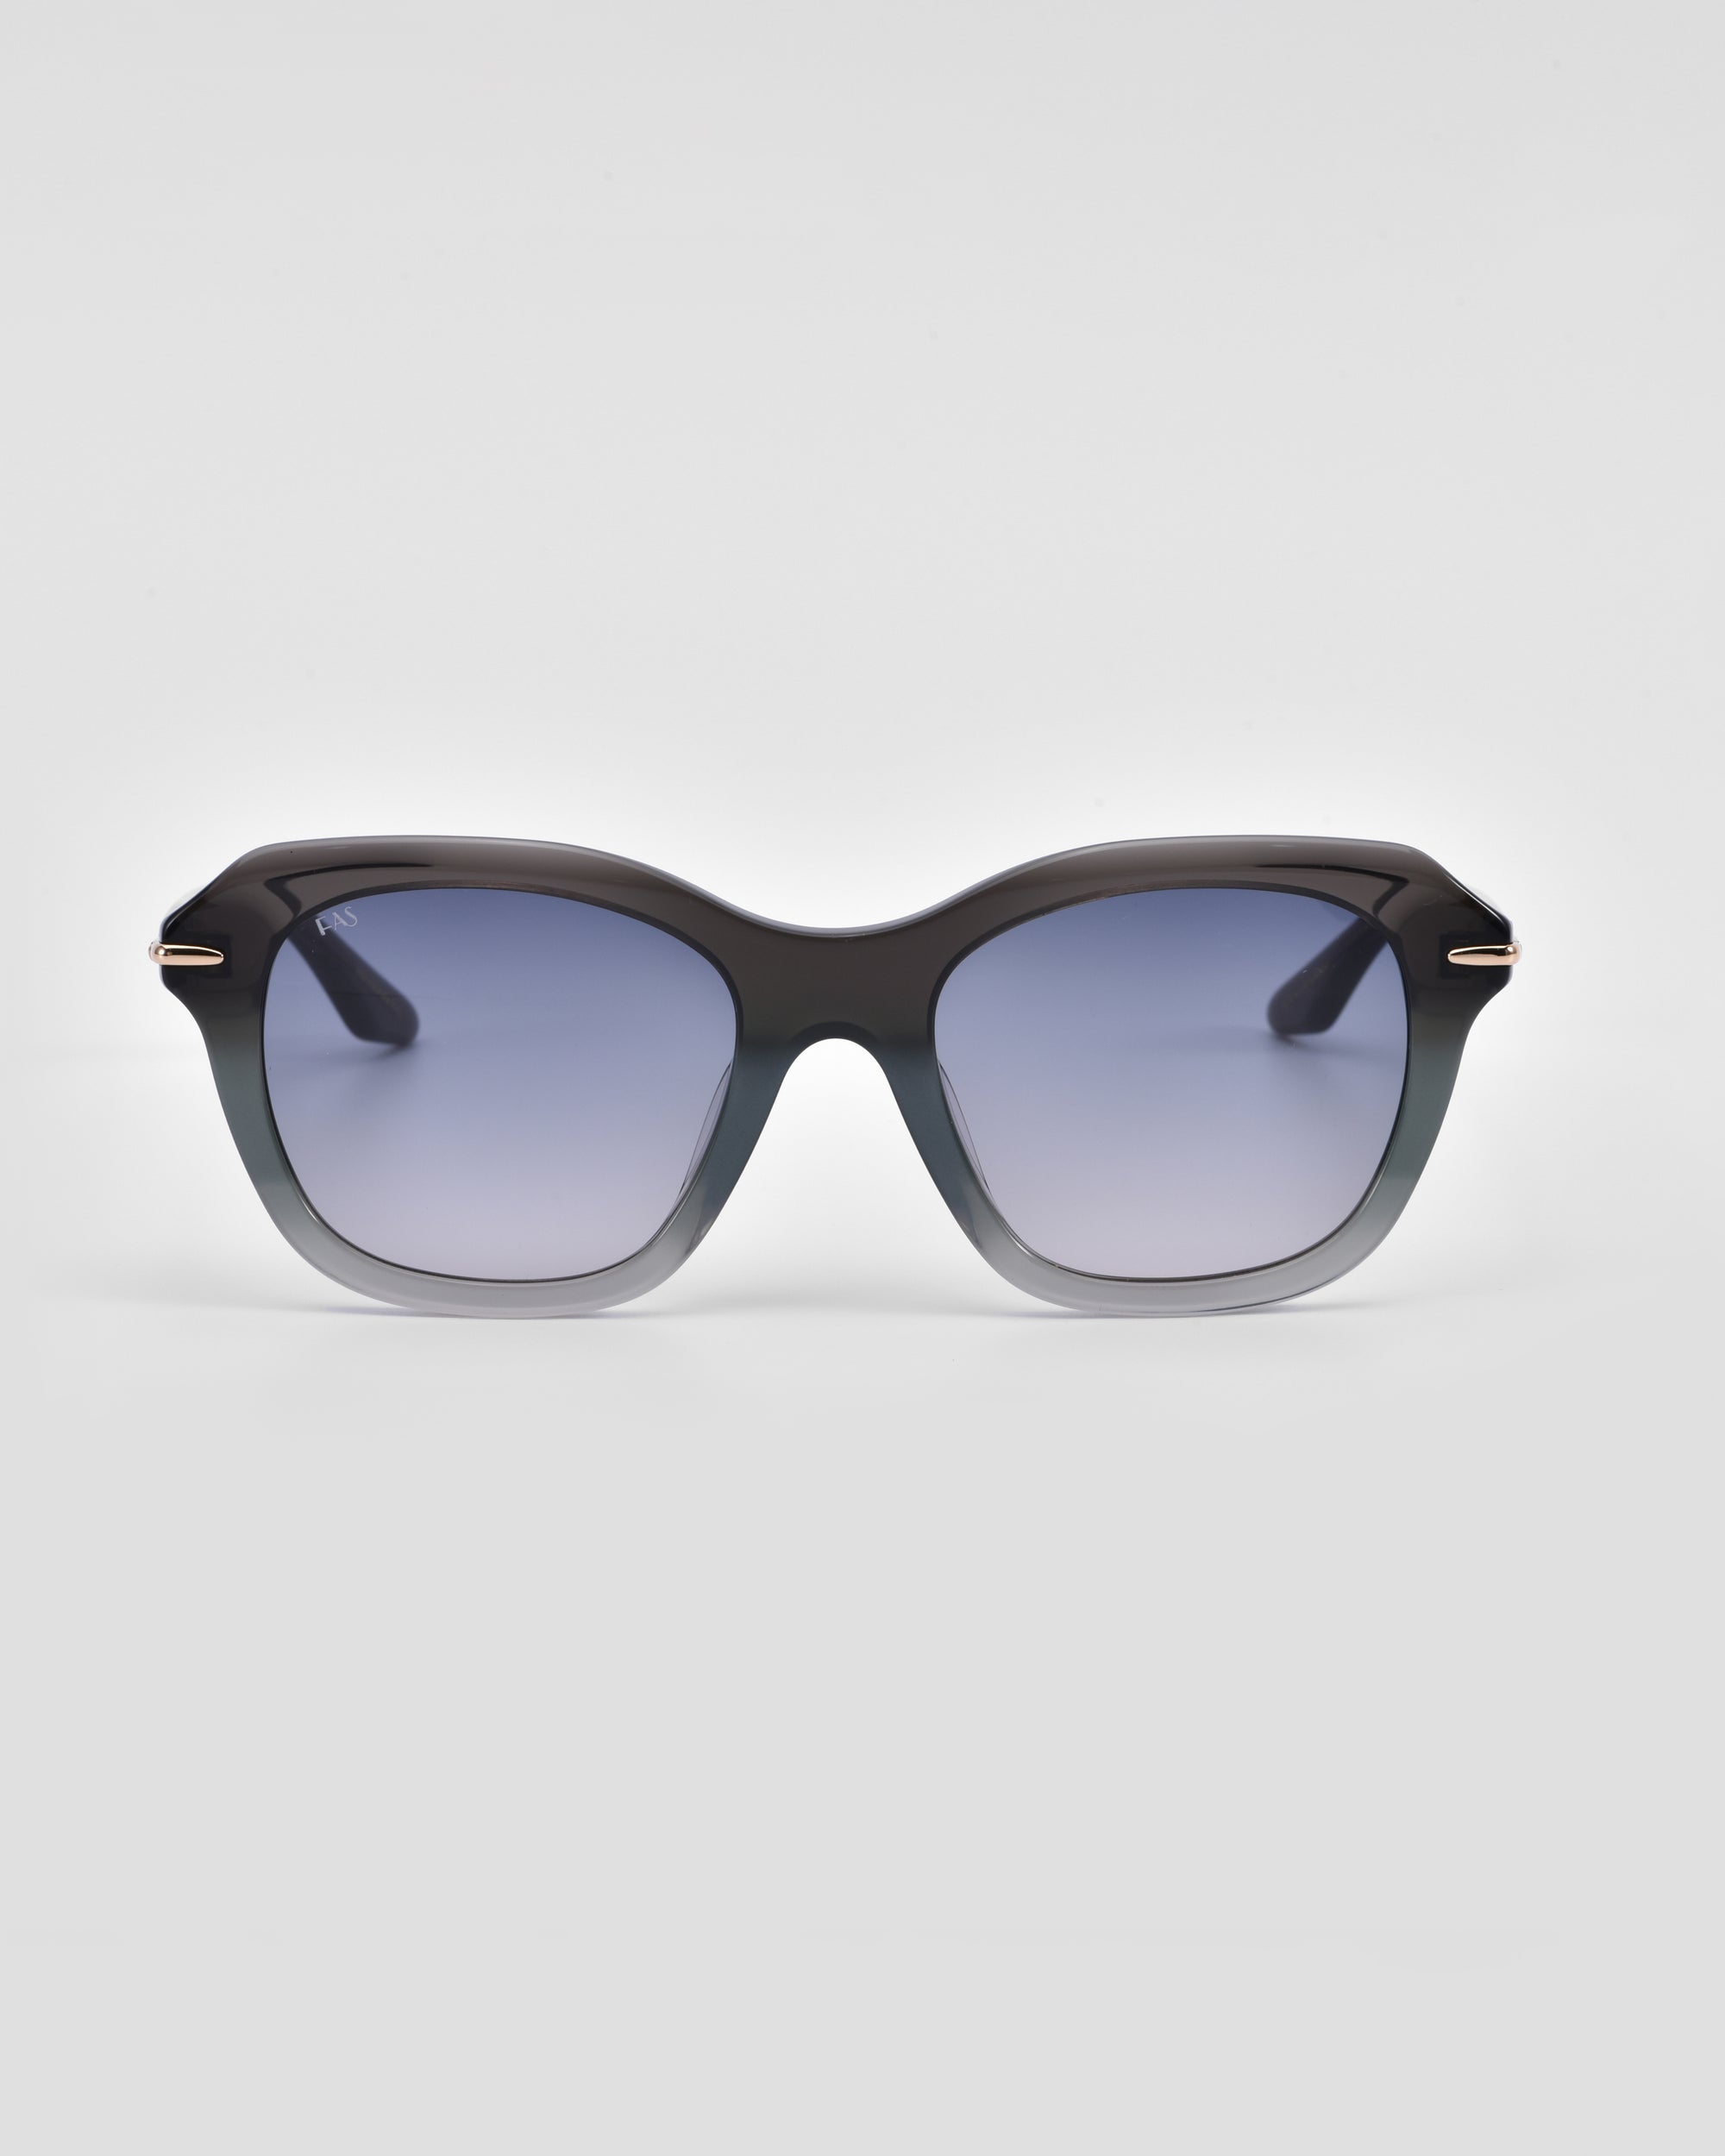 A pair of stylish, oversized For Art&#39;s Sake® Helene cat-eye sunglasses with black frames that gradually transition to a lighter shade at the bottom. The lenses are tinted dark, providing a cool and fashionable look. The background is plain and light gray.